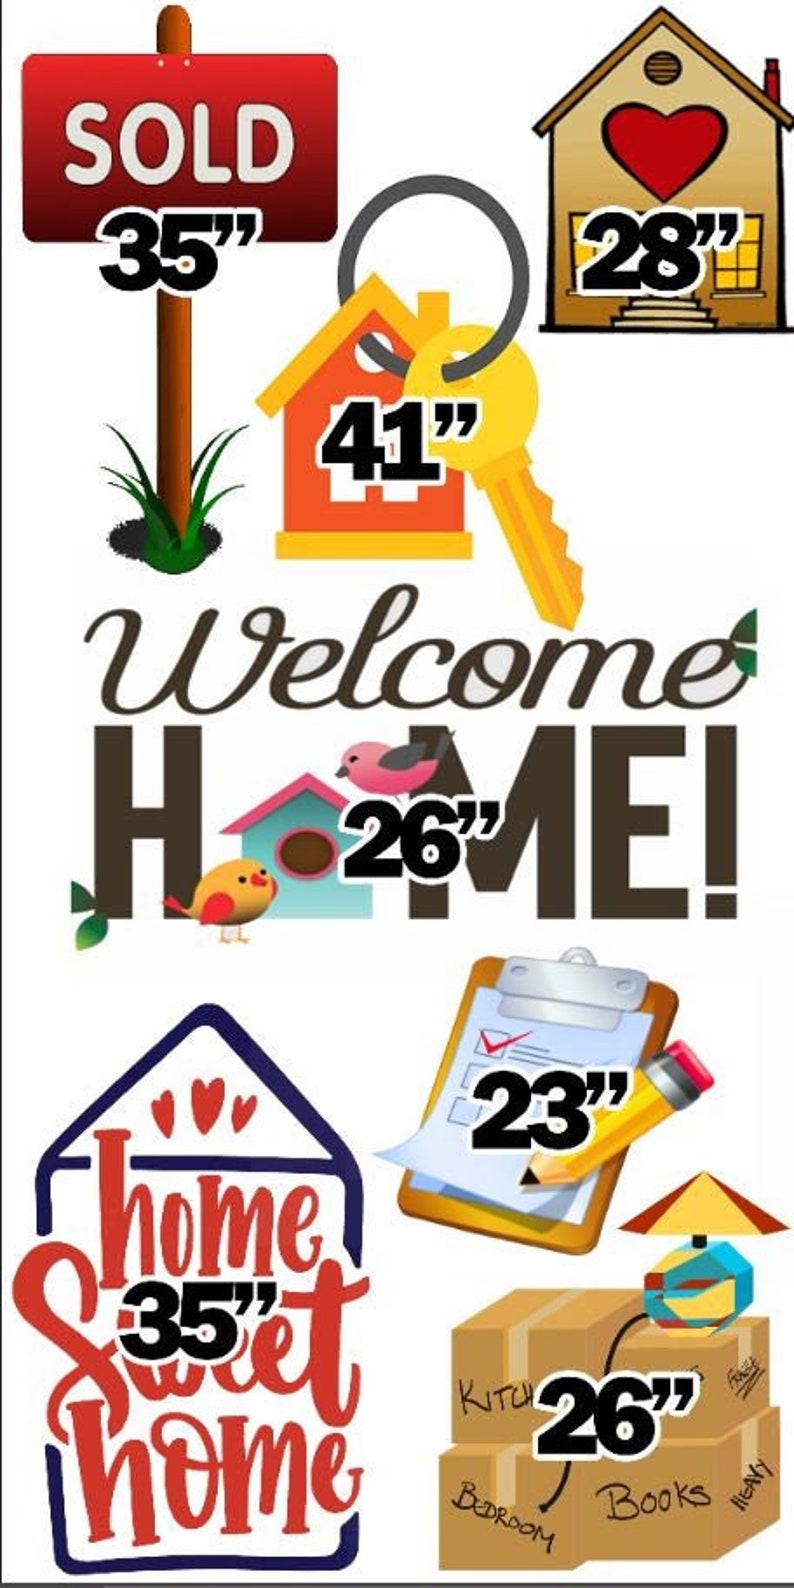 Welcome Home Set Coroplast Party Props decorations chiaras backdrops cutouts signs decor table centerpieces Yard cards NOstandsincluded image 1